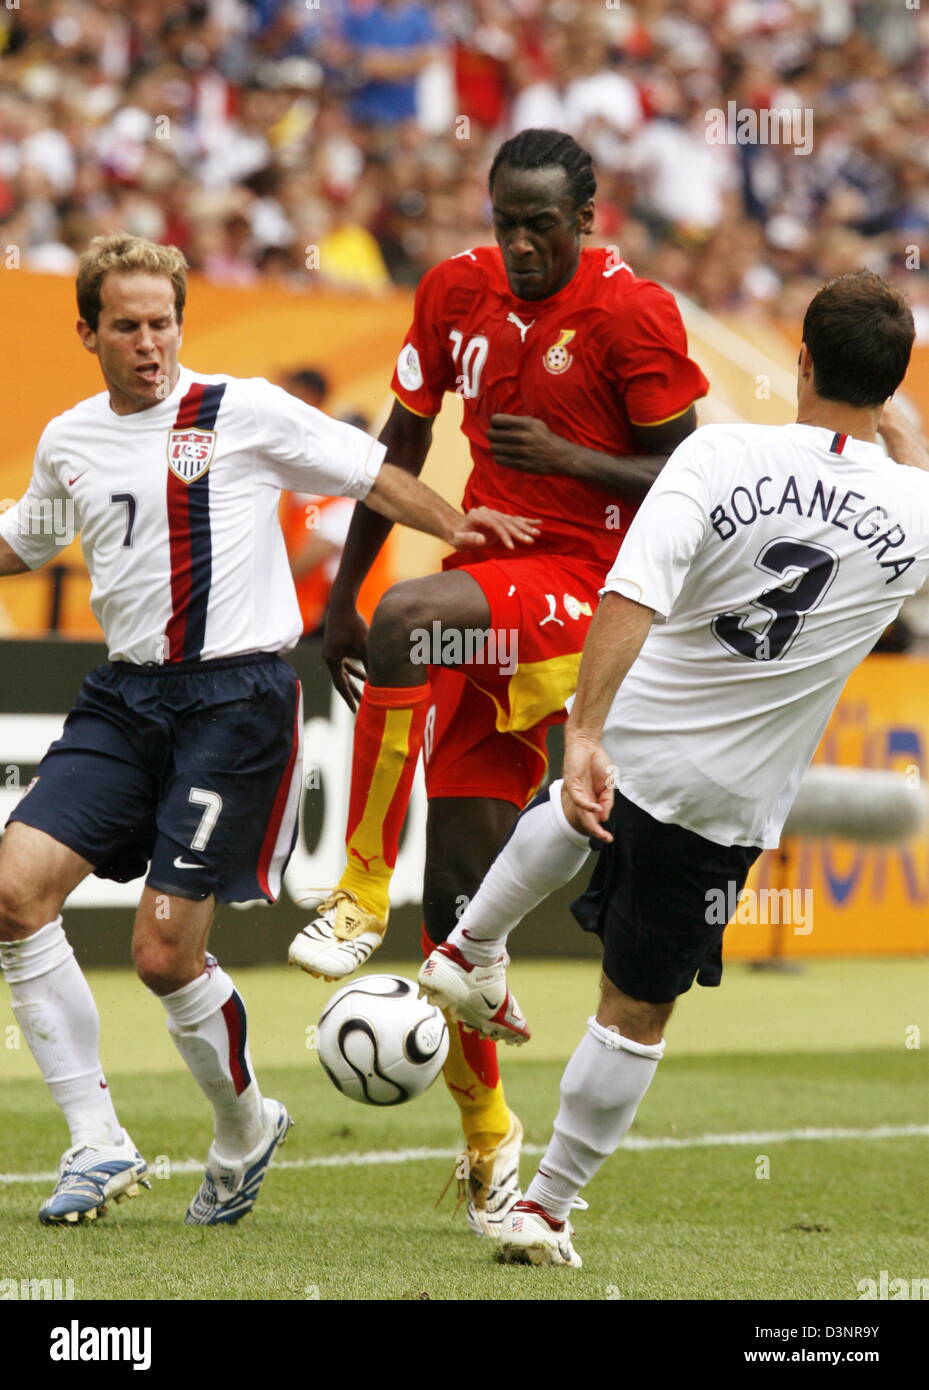 Stephen Appiah of Ghana (C) vies for the ball with Eddie Lewis (L) and Carlos Bocanegra (R) of USA during the group E preliminary round match of the 2006 FIFA World Cup between Ghana and USA in Nuremberg, Germany, Thursday 22 June 2006. DPA/DANIEL KARMANN +++ Mobile Services OUT +++ Please also refer to FIFA's Terms and Conditions. Stock Photo